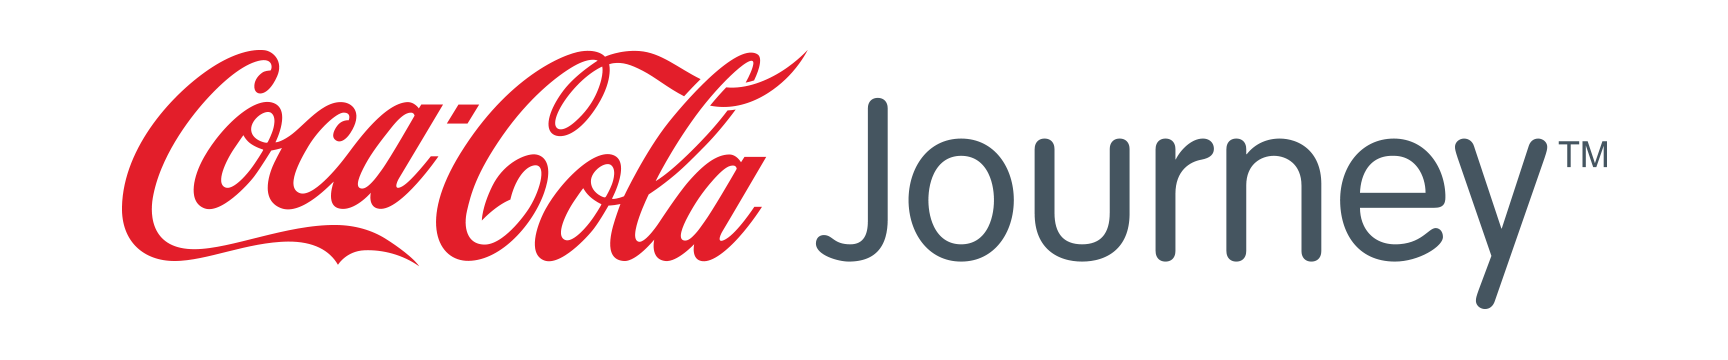 Coca-Cola Journey - Logo - https://s41078.pcdn.co/wp-content/uploads/2018/11/Content-Marketing-Brand-Journalism-2.png